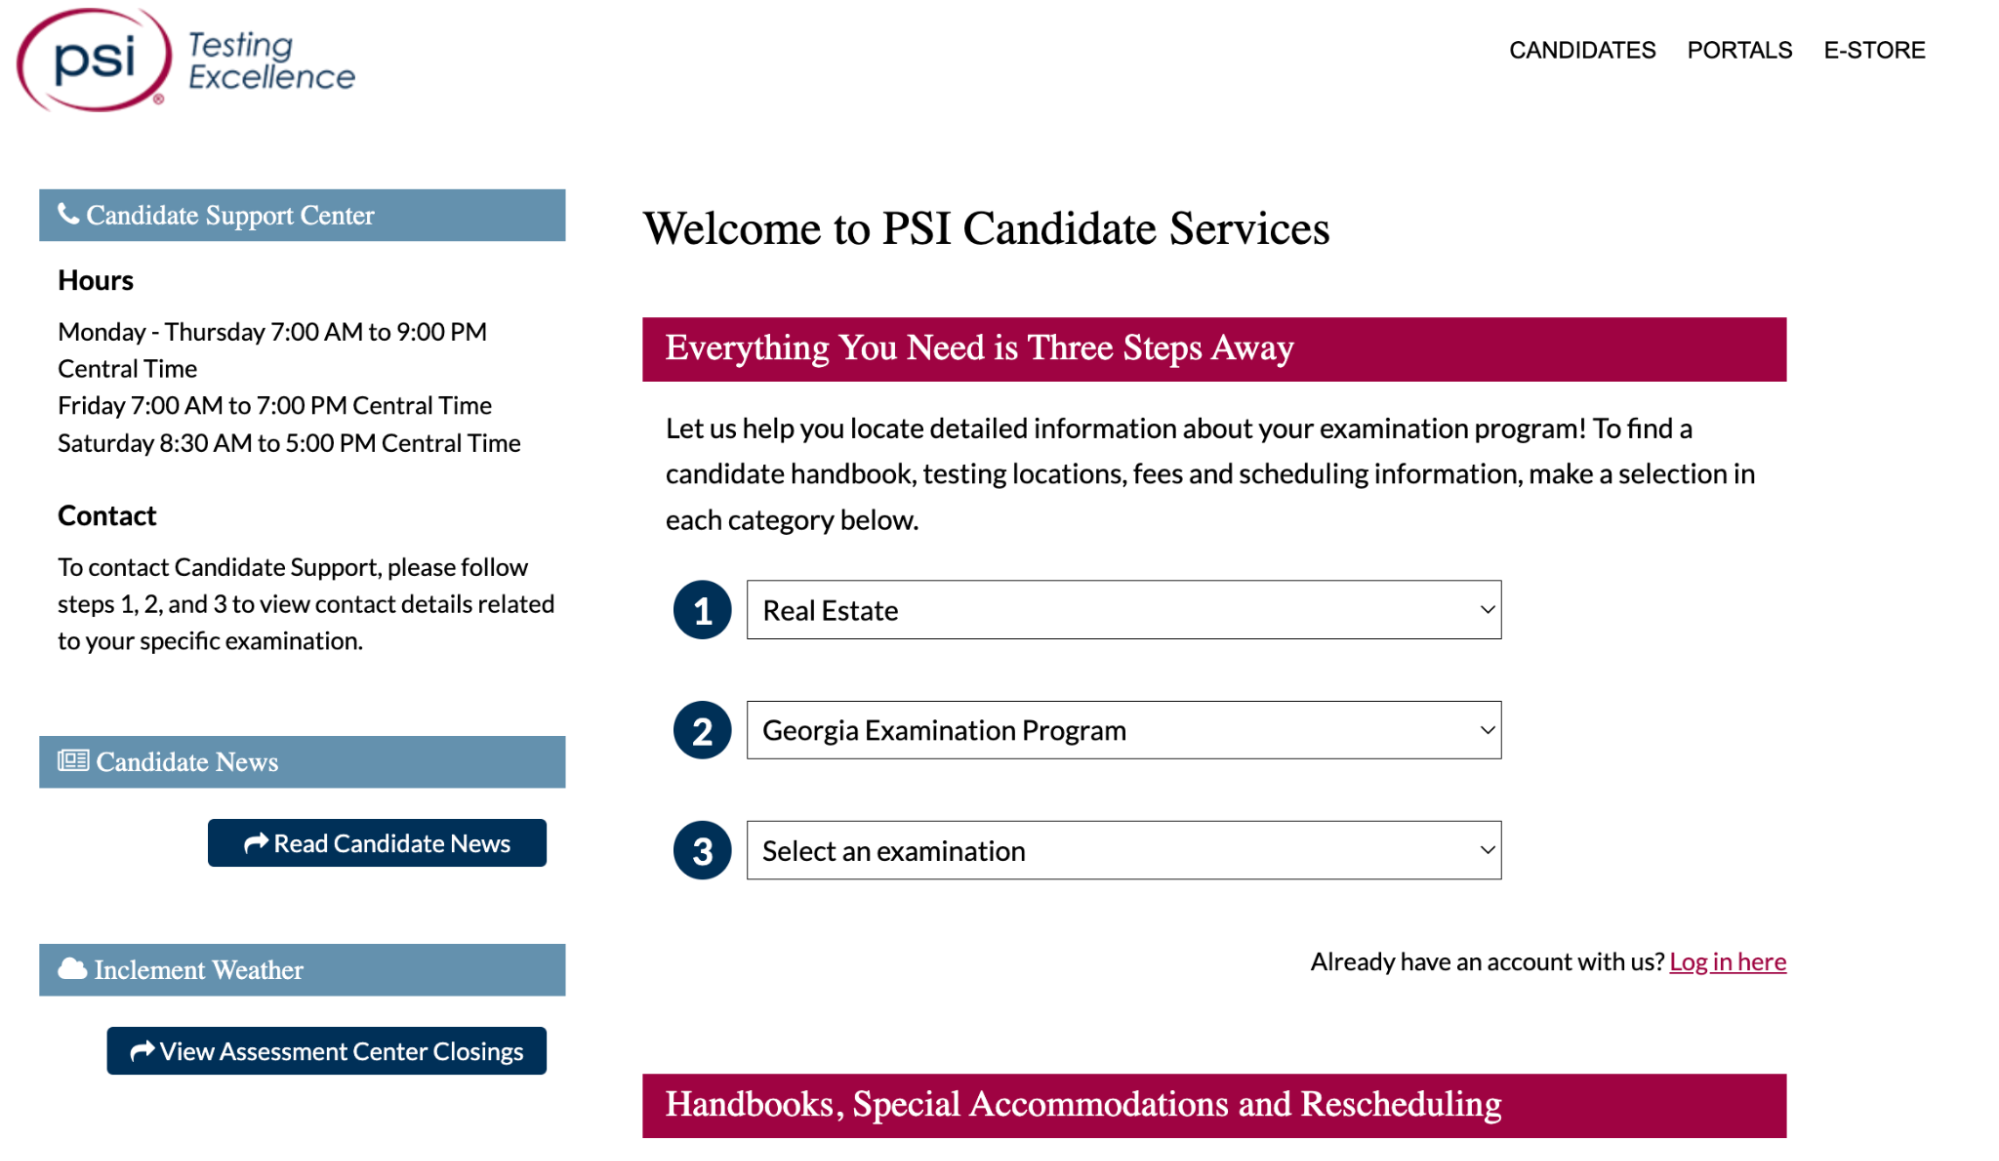 Page of PSI Candidate Services showing the categories to be selected for scheduling the exam.